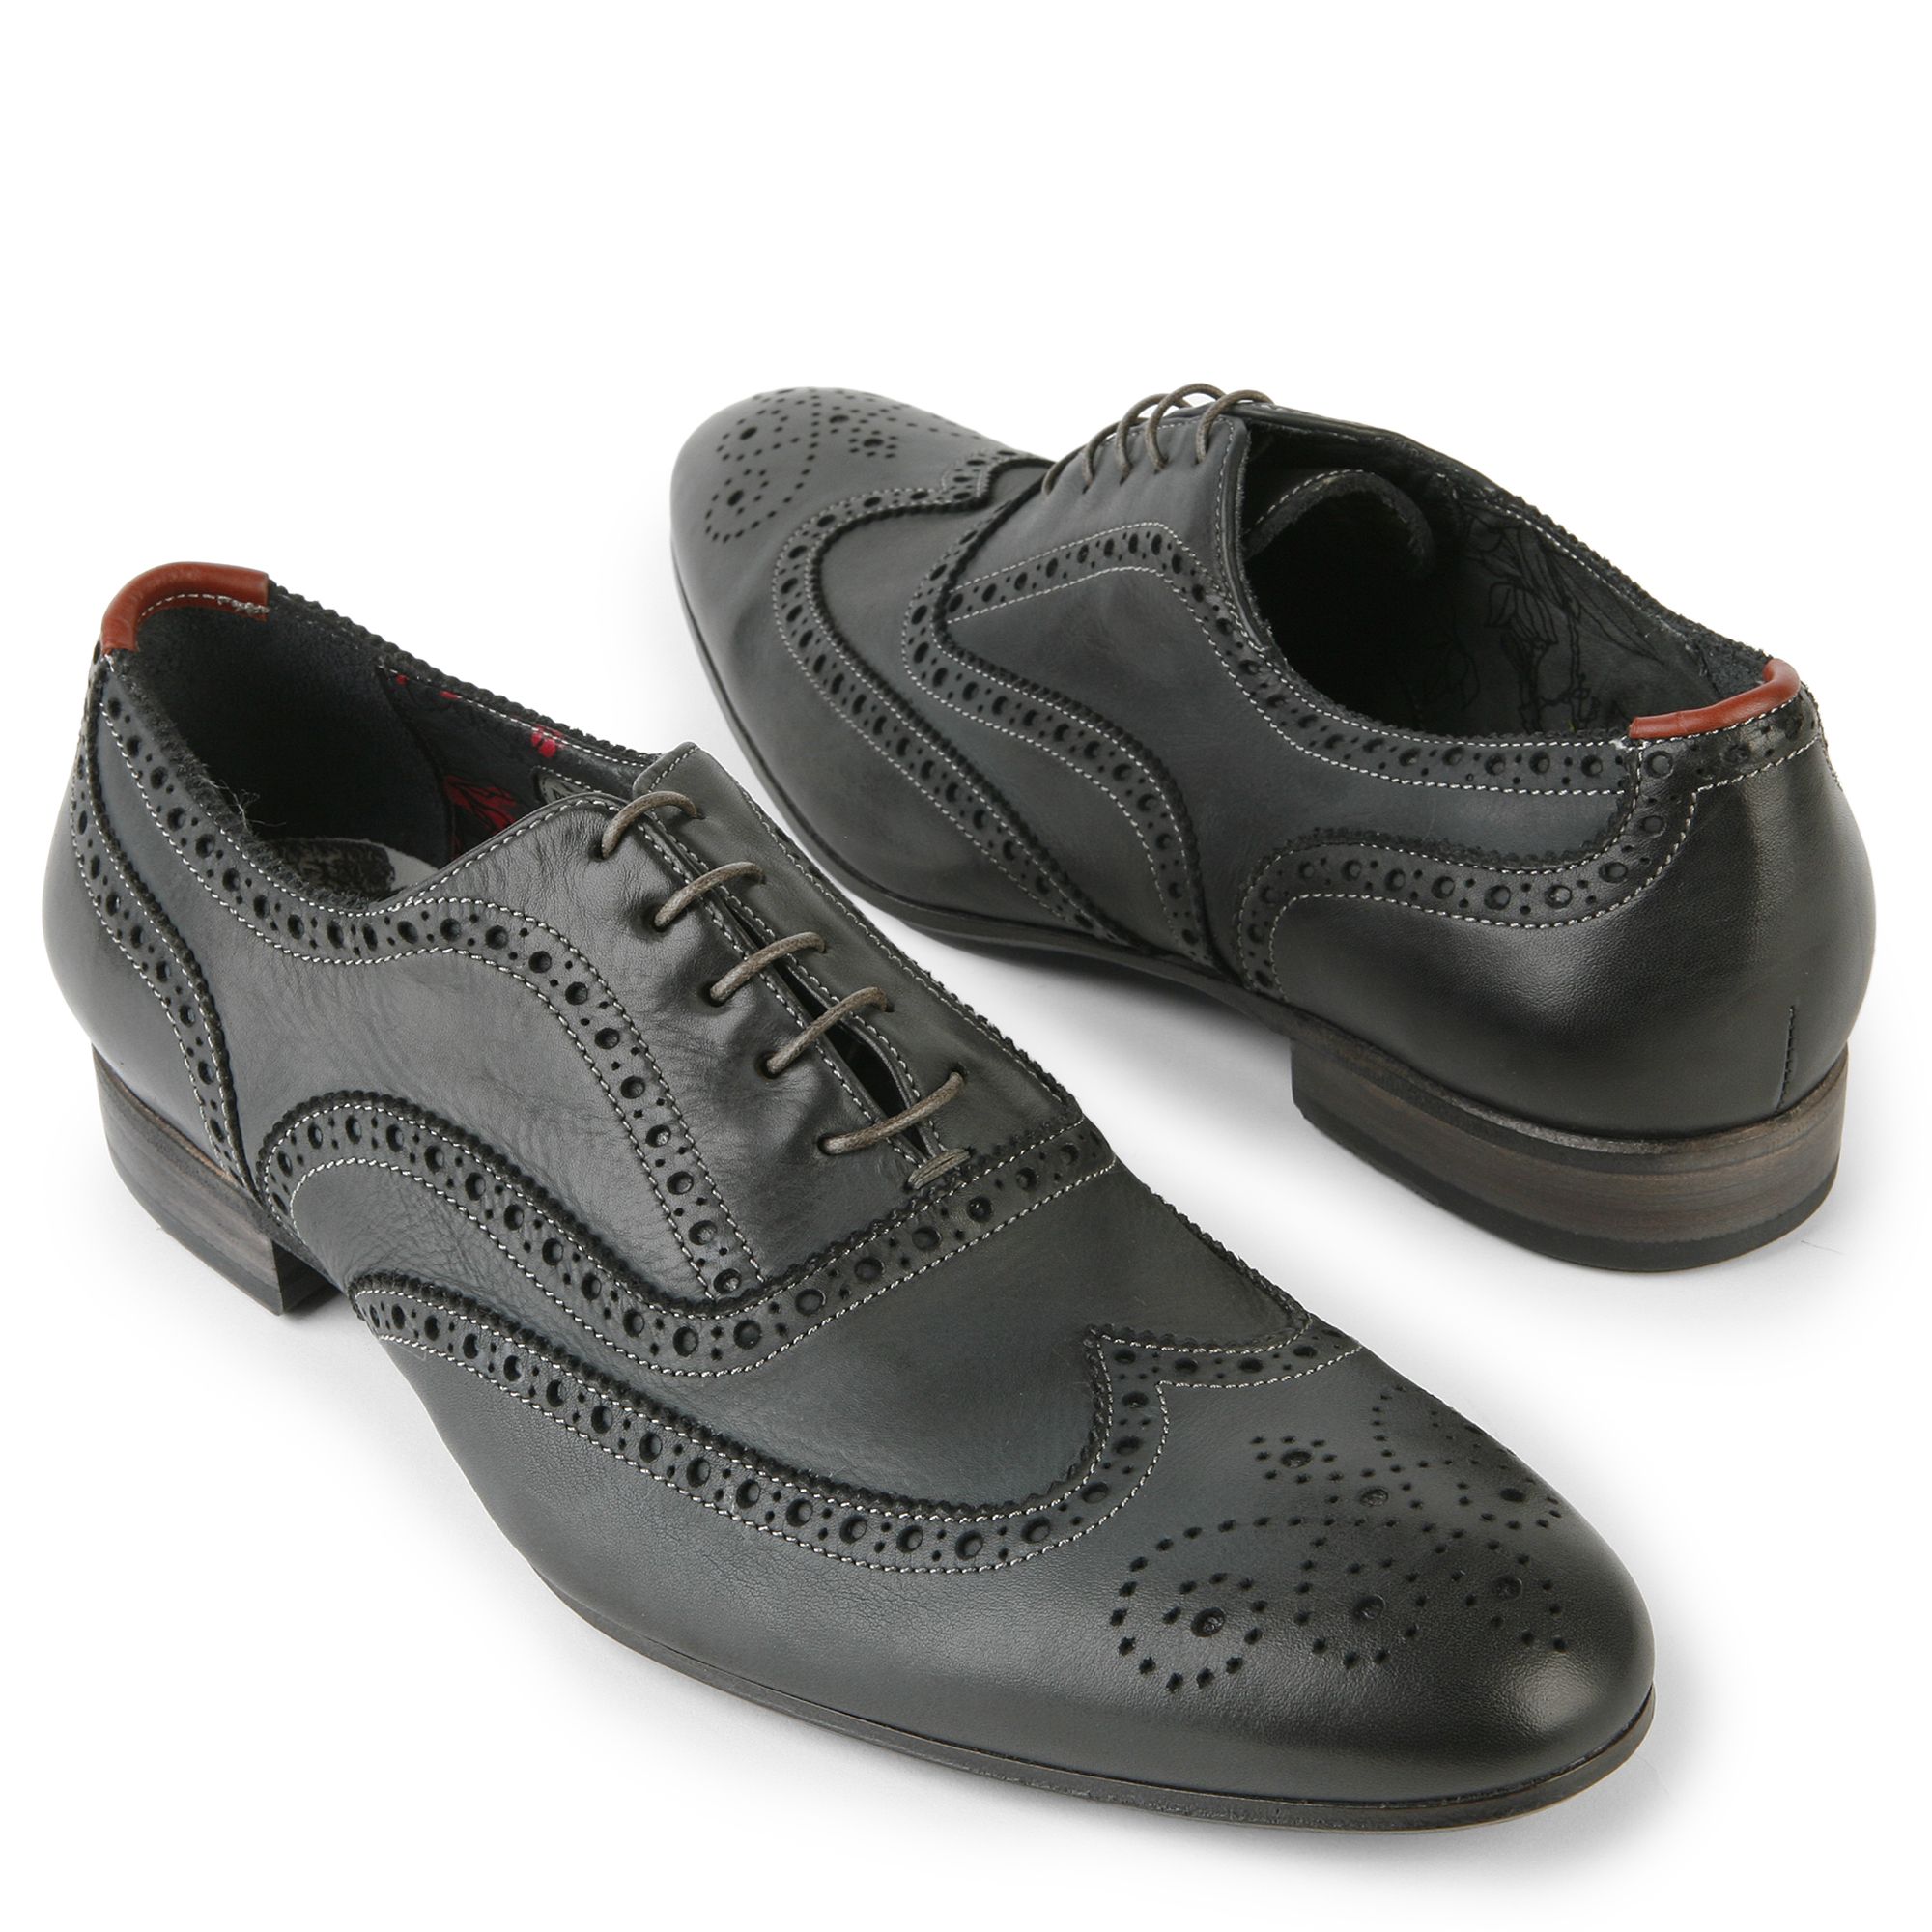 brogues paul smith online store 2395e 14055